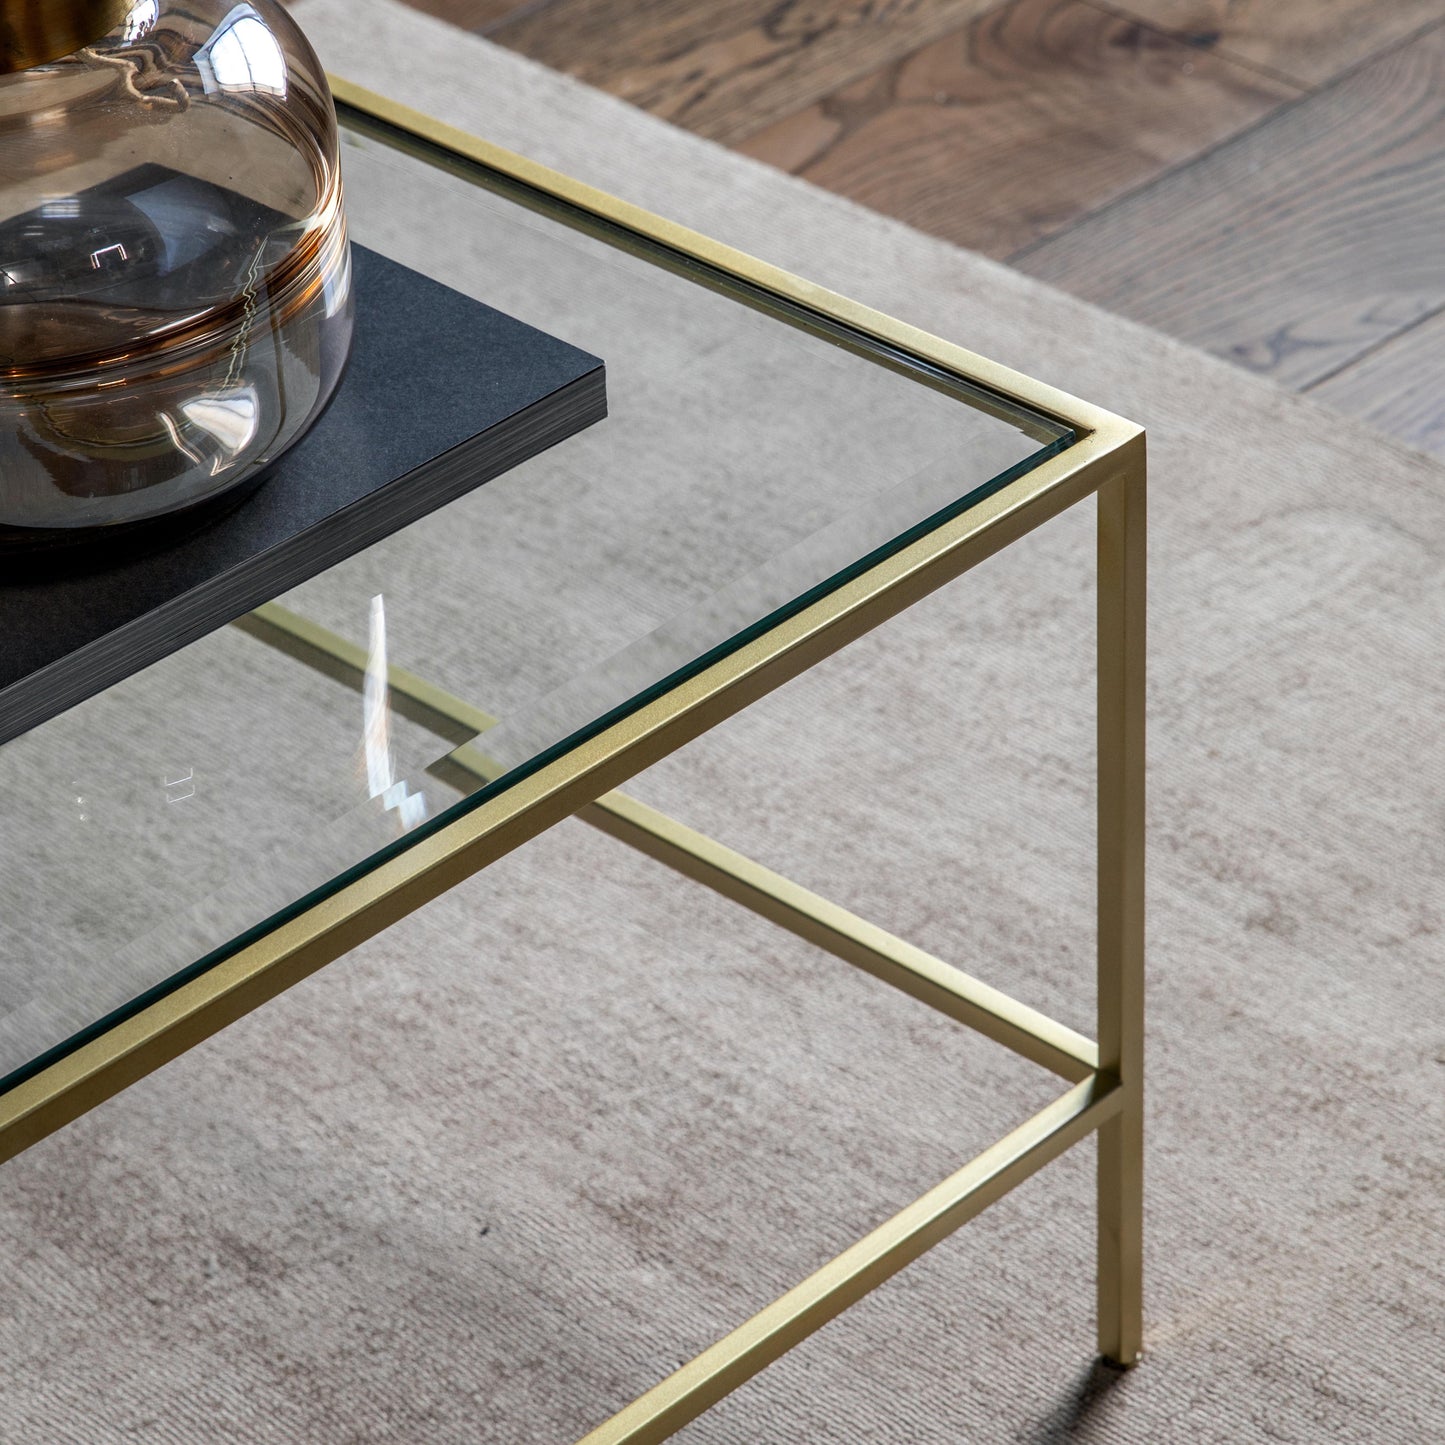 Engleborne Coffee Table Champagne with a gold frame - perfect for interior decor and home furniture.